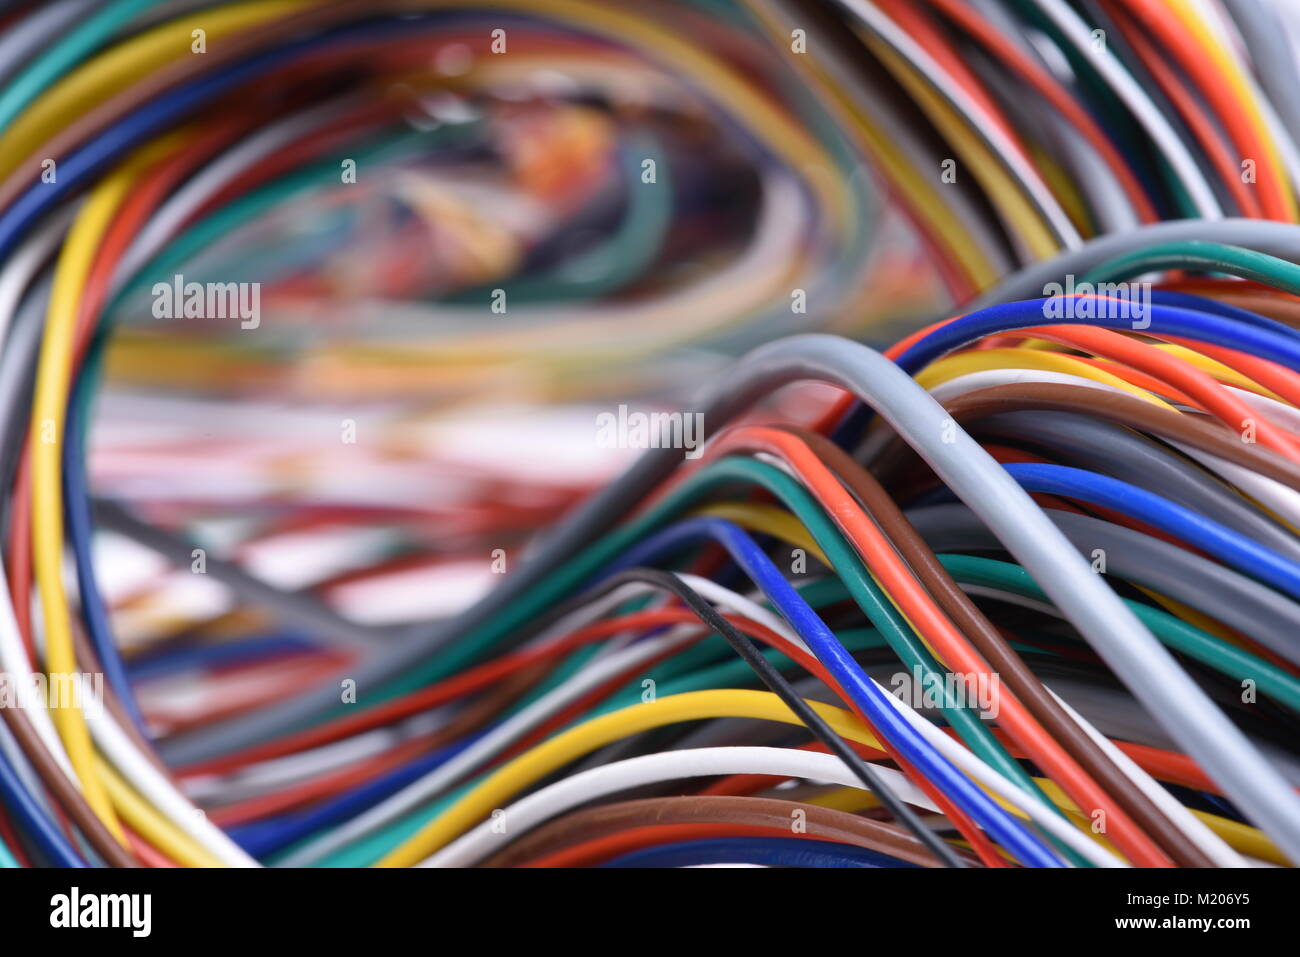 Multicore Cable High Resolution Stock Photography and Images - Alamy